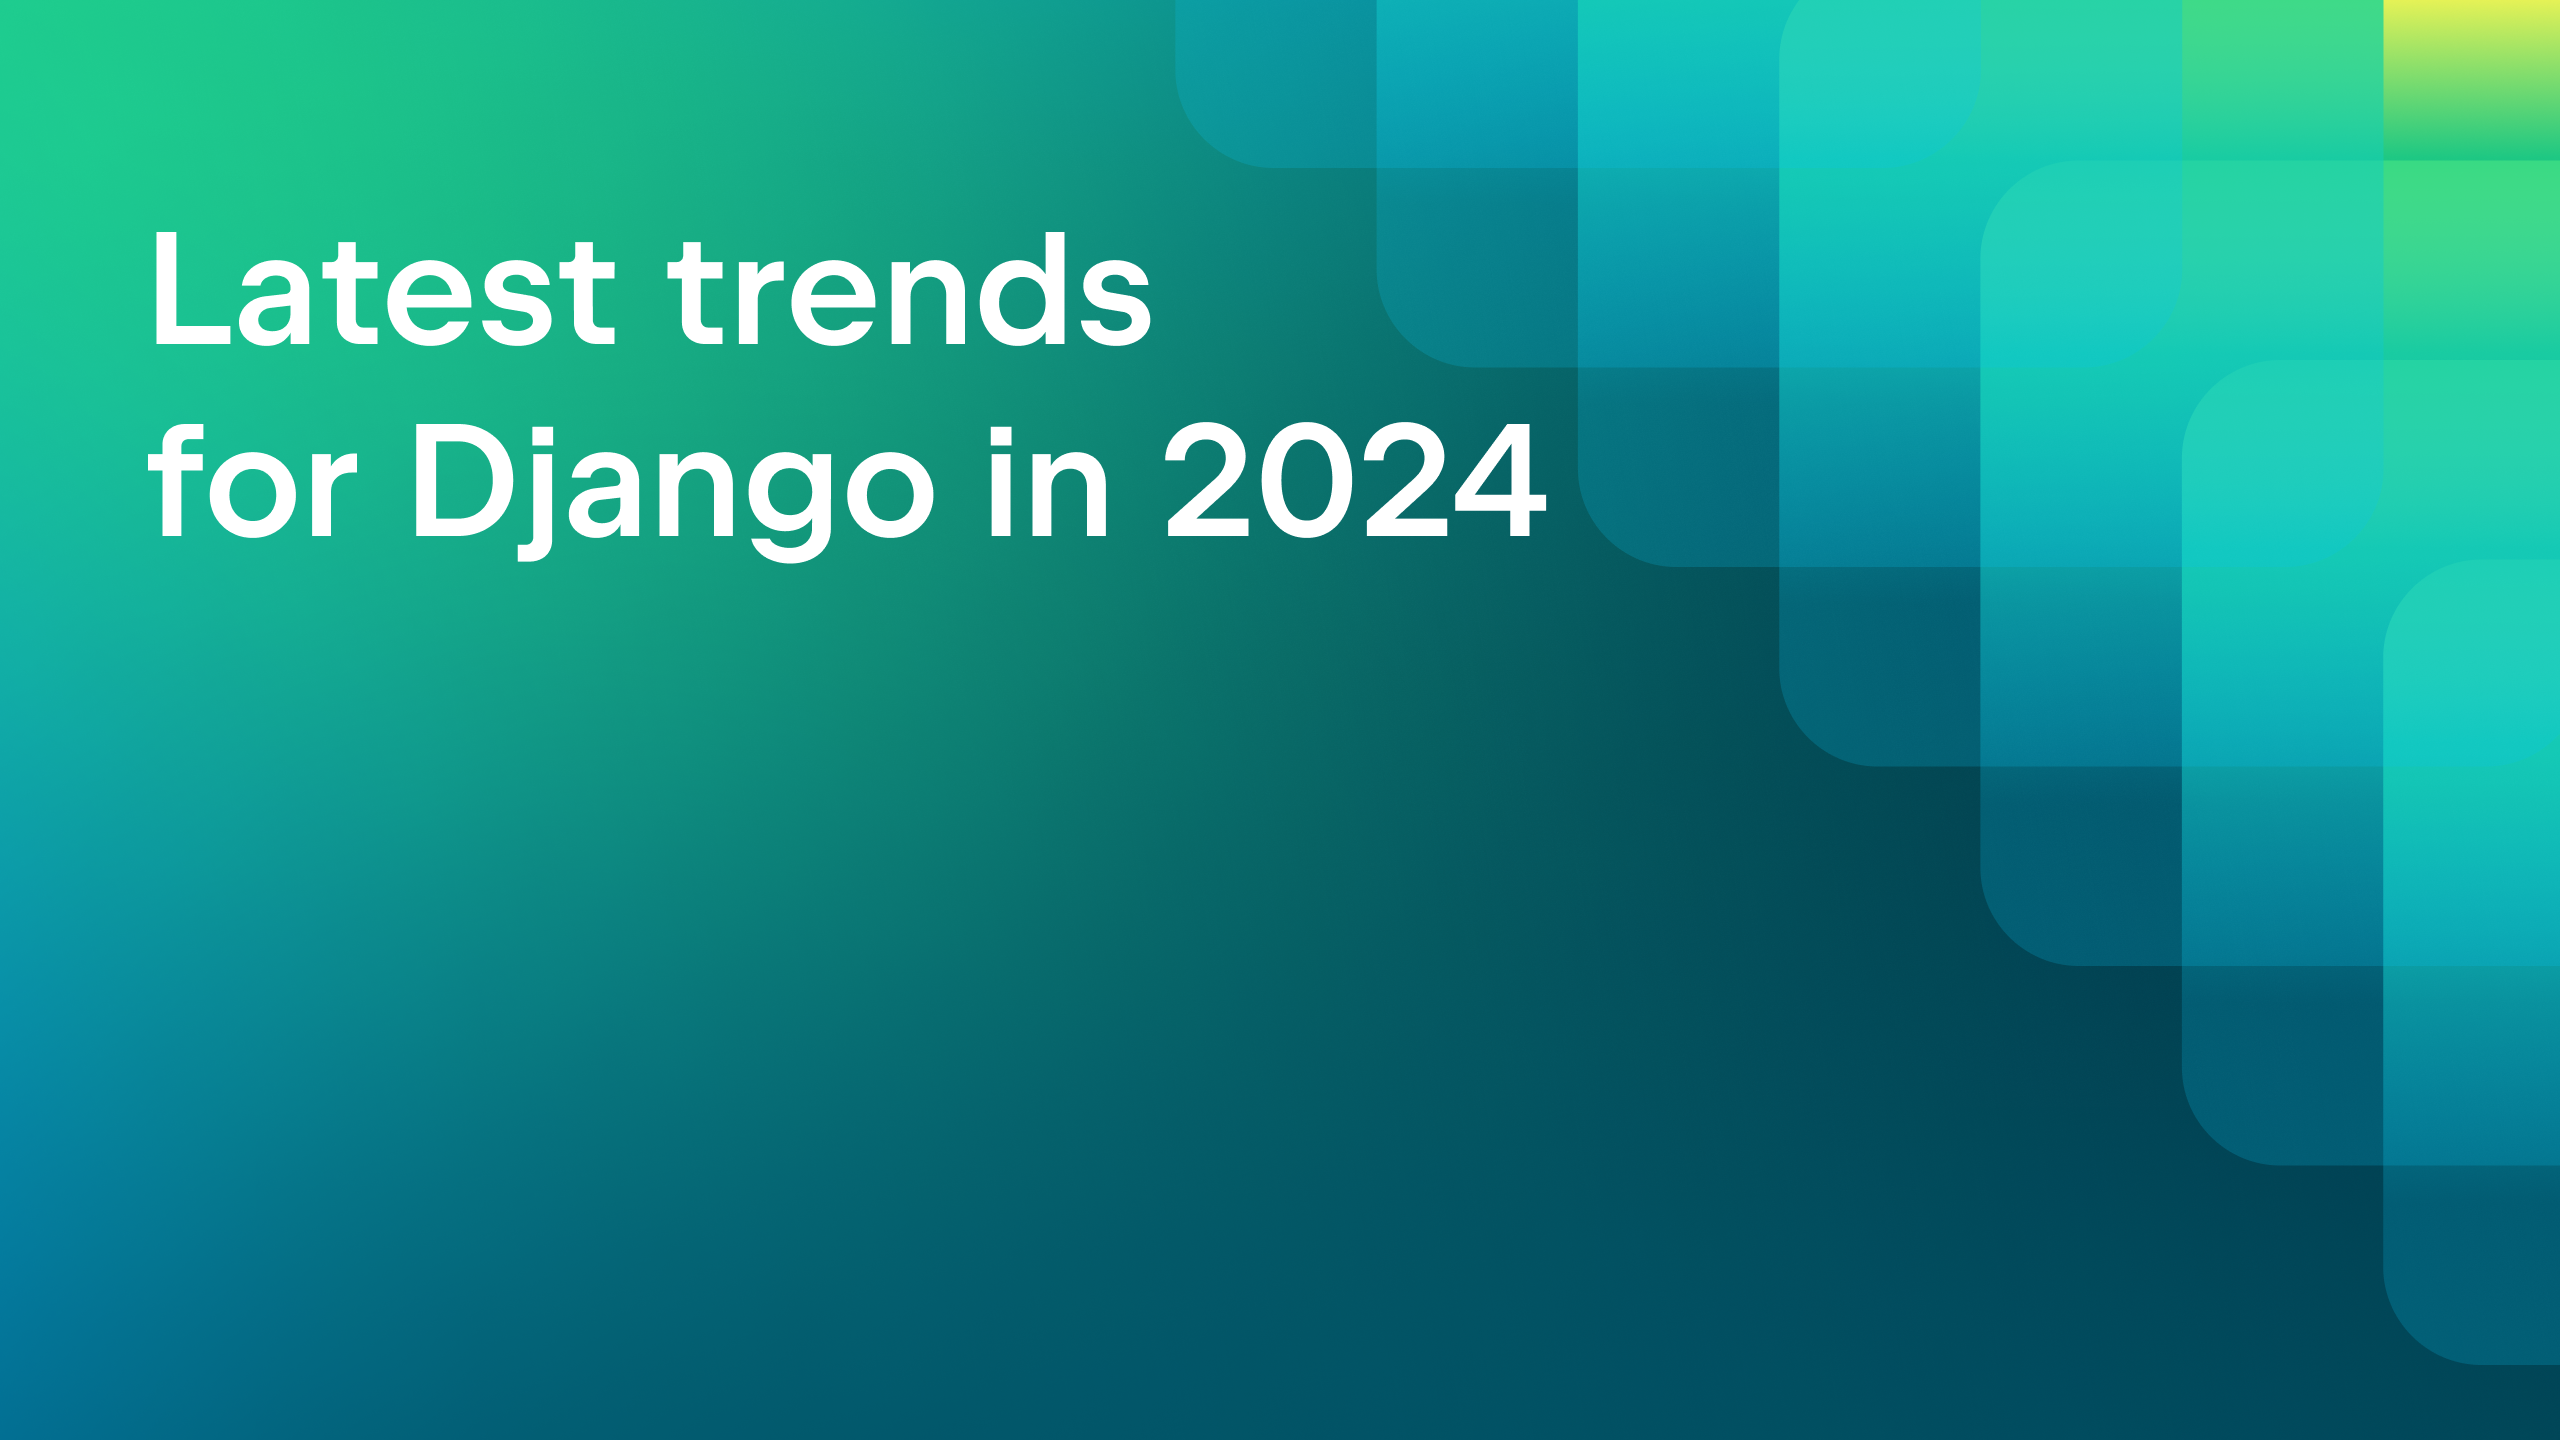 Latest trends for Django in 2024